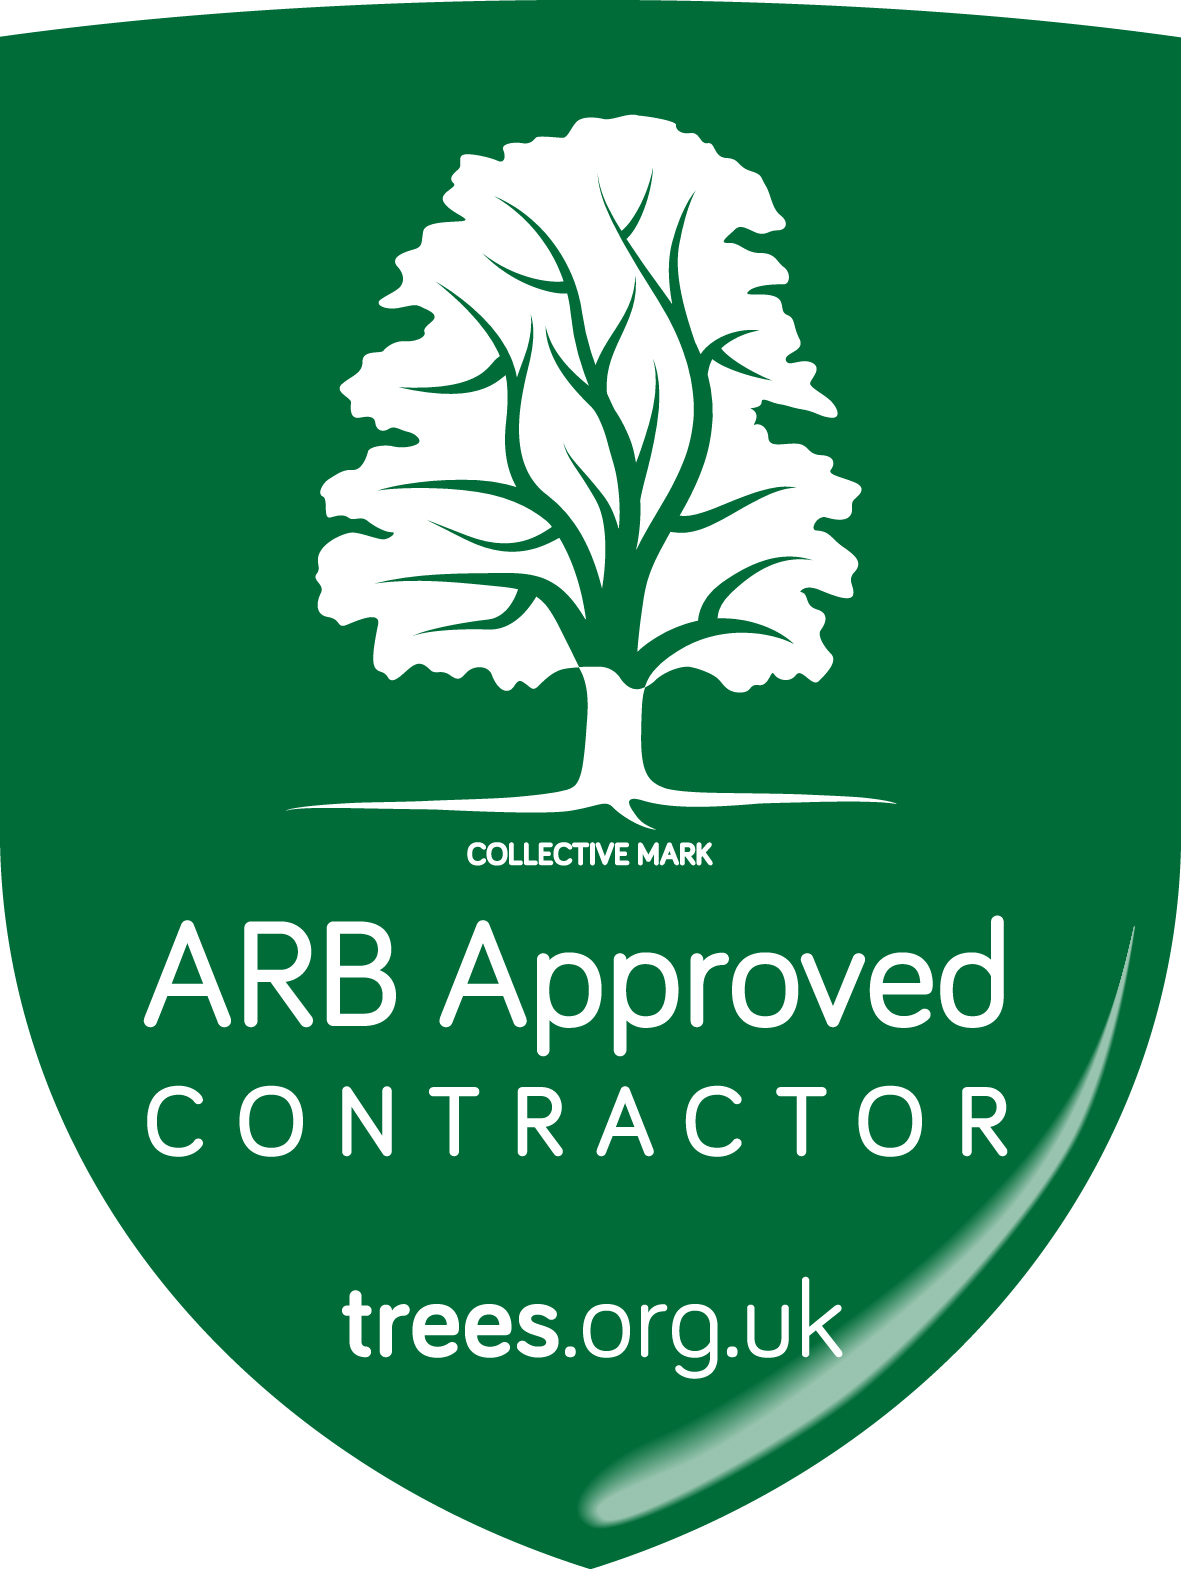 The ARB Approved Contractor Shield